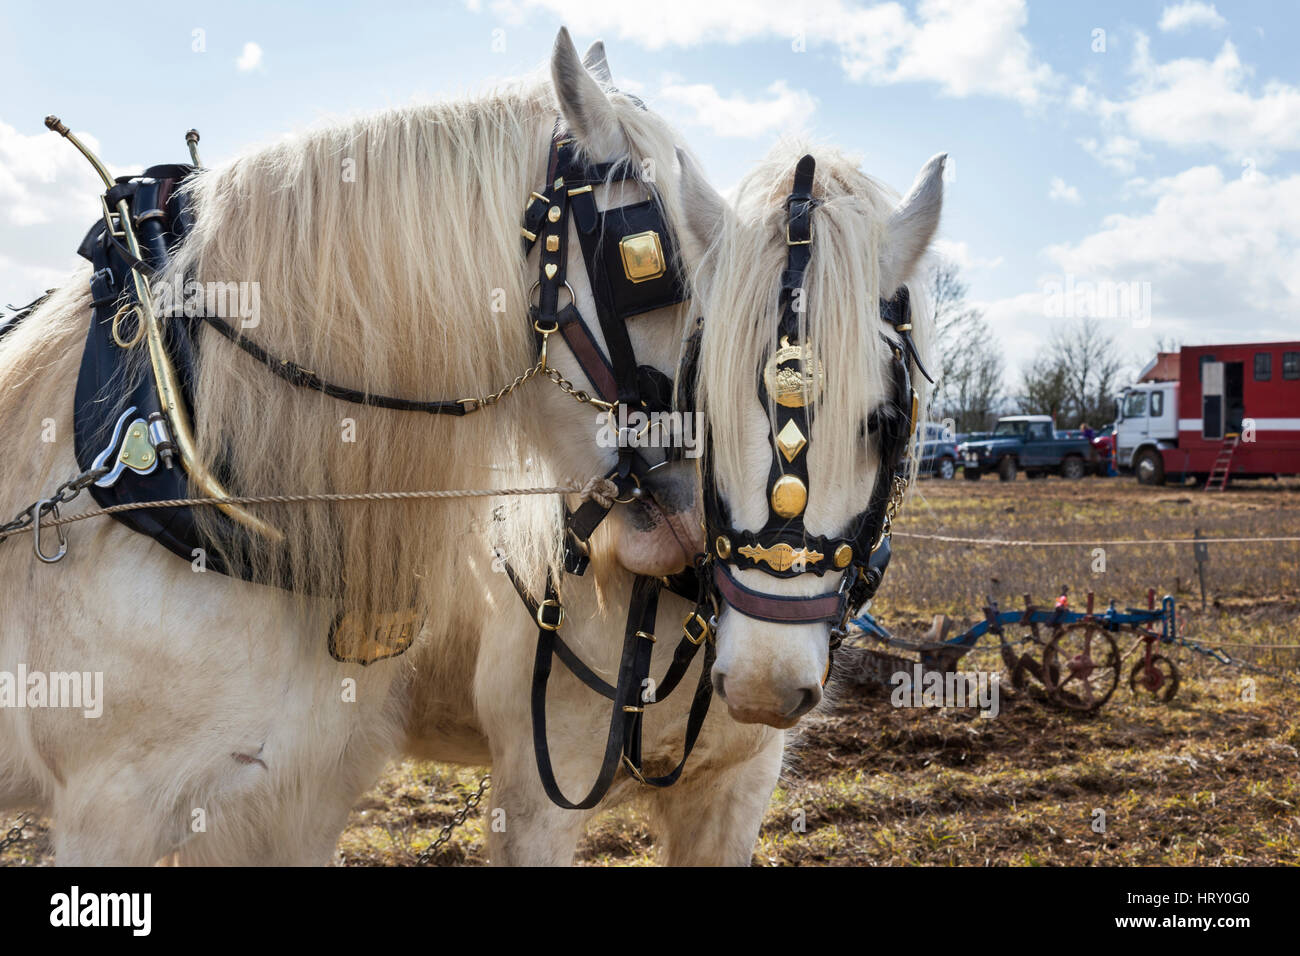 Shire horses at a ploughing match held in Trowbridge, Wiltshire, England, UK Stock Photo